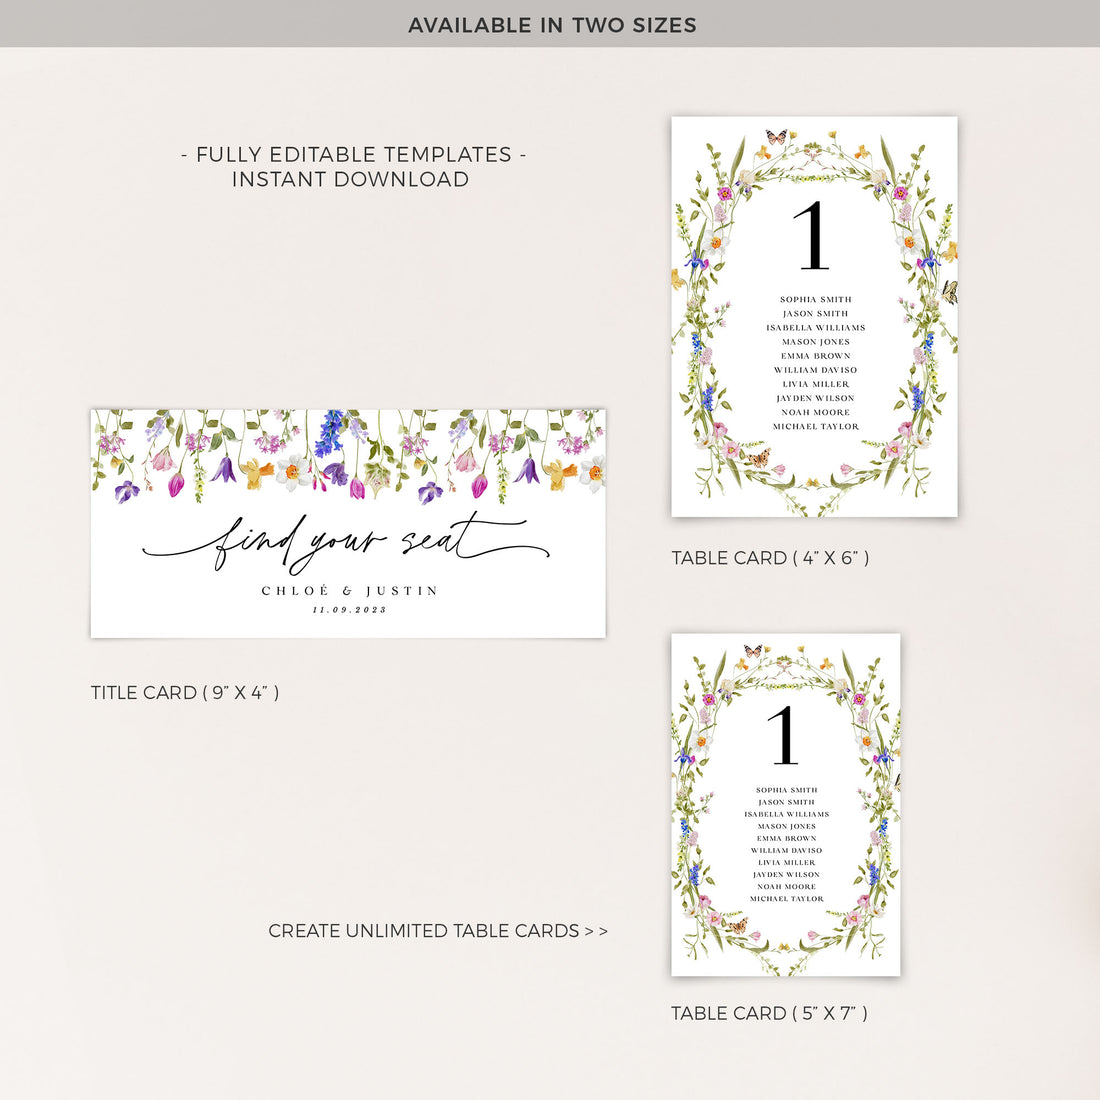 CHLOÉ Floral Wedding Seating Chart Card Template